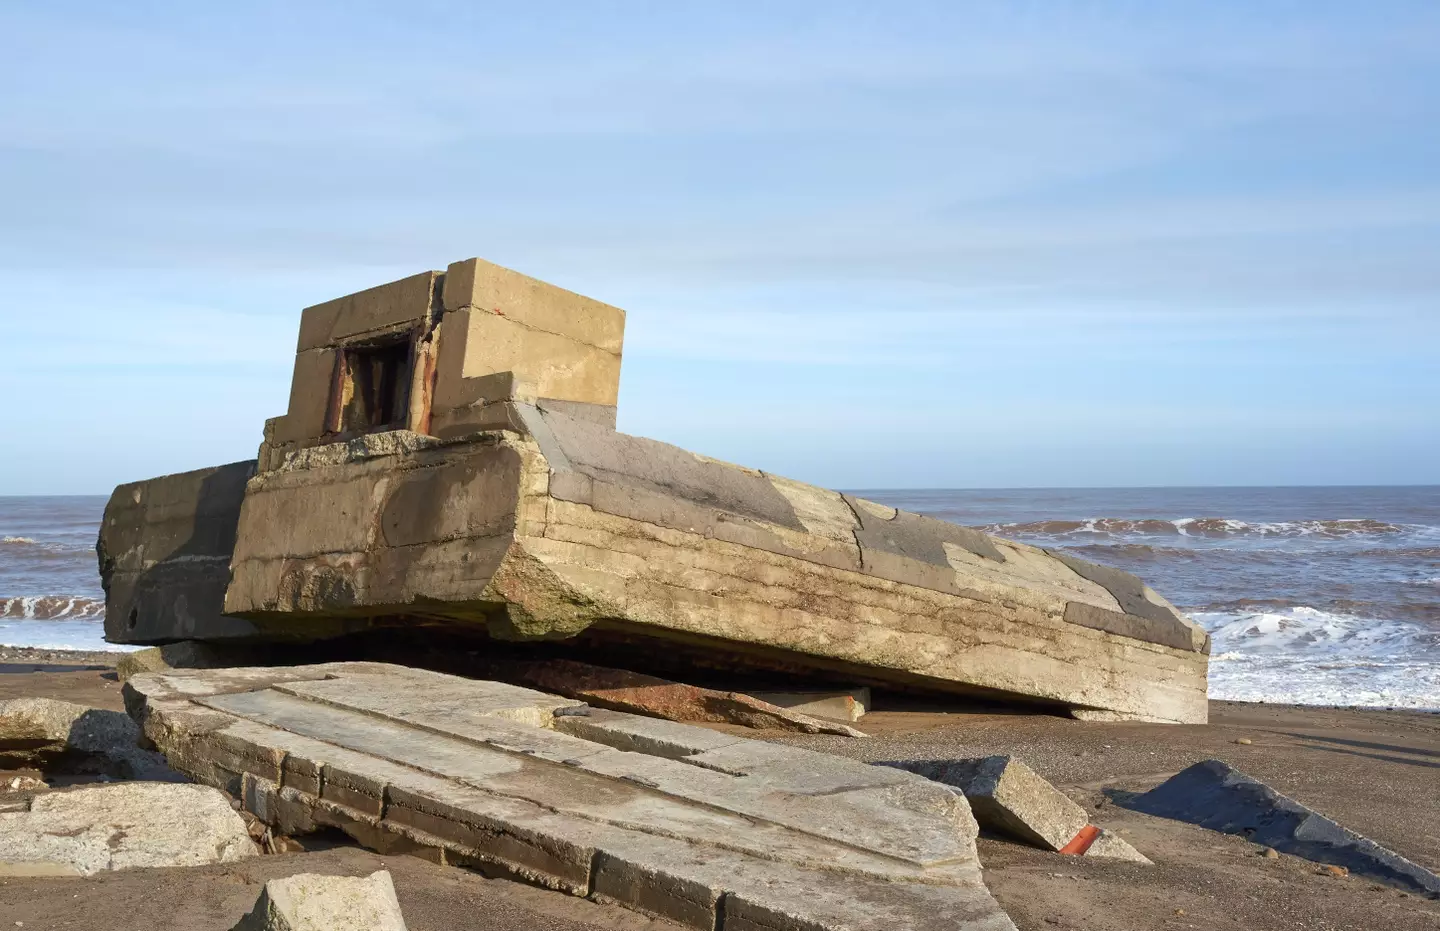 Spurn Head, near where Ravenser Odd used to stand before it was swept into the sea, is also home to the remains of World War Two coastal defences.